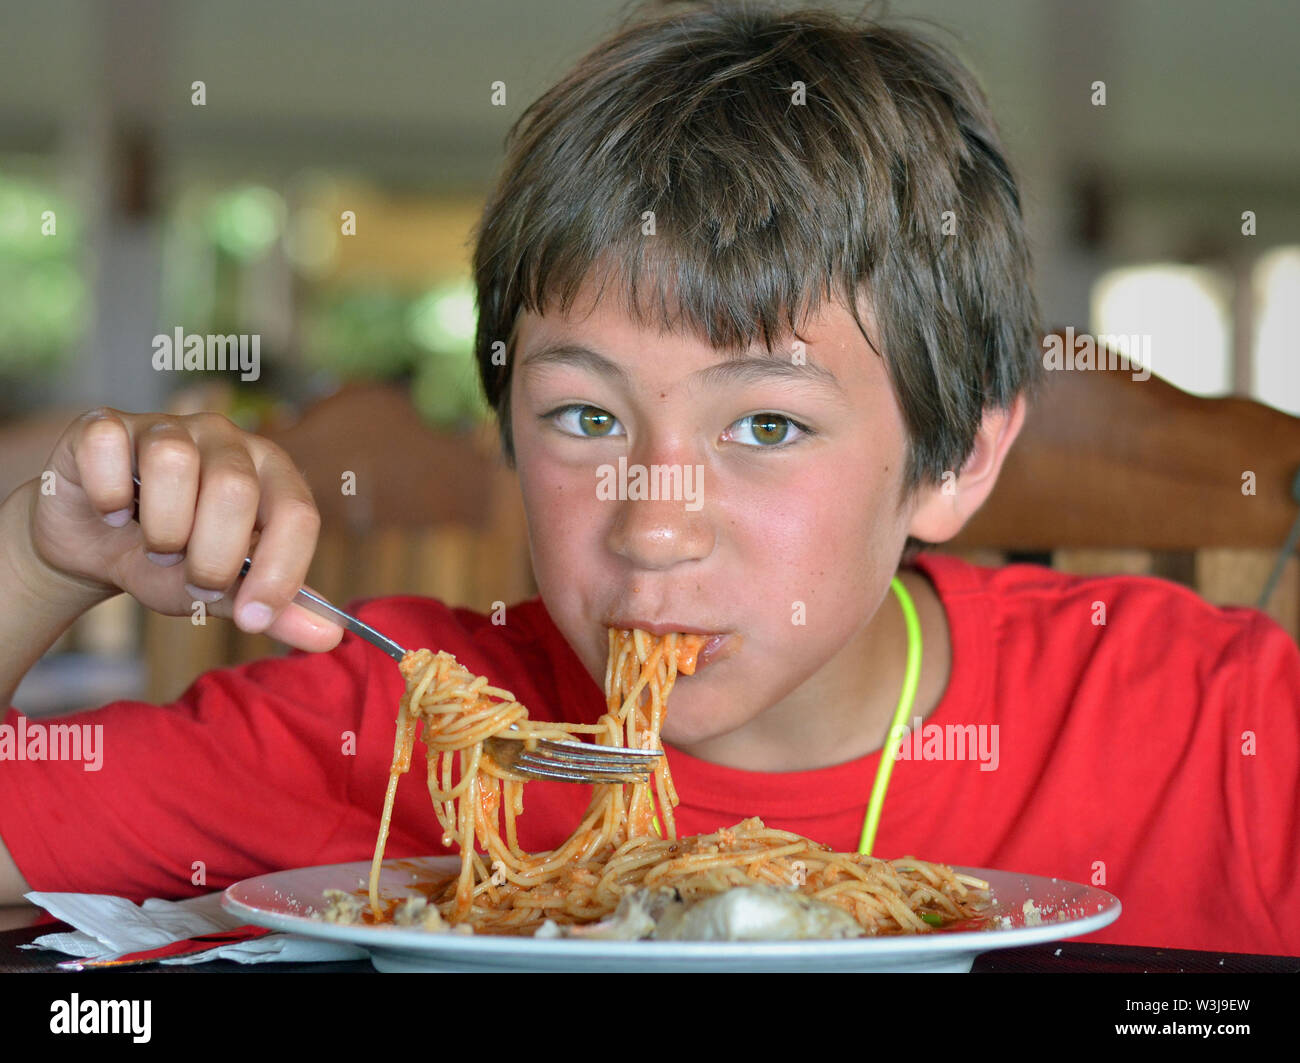 Cute little Canadian boy of mixed-race origin (Caucasian and Southeast Asian) digs into a plate of spaghetti. Stock Photo